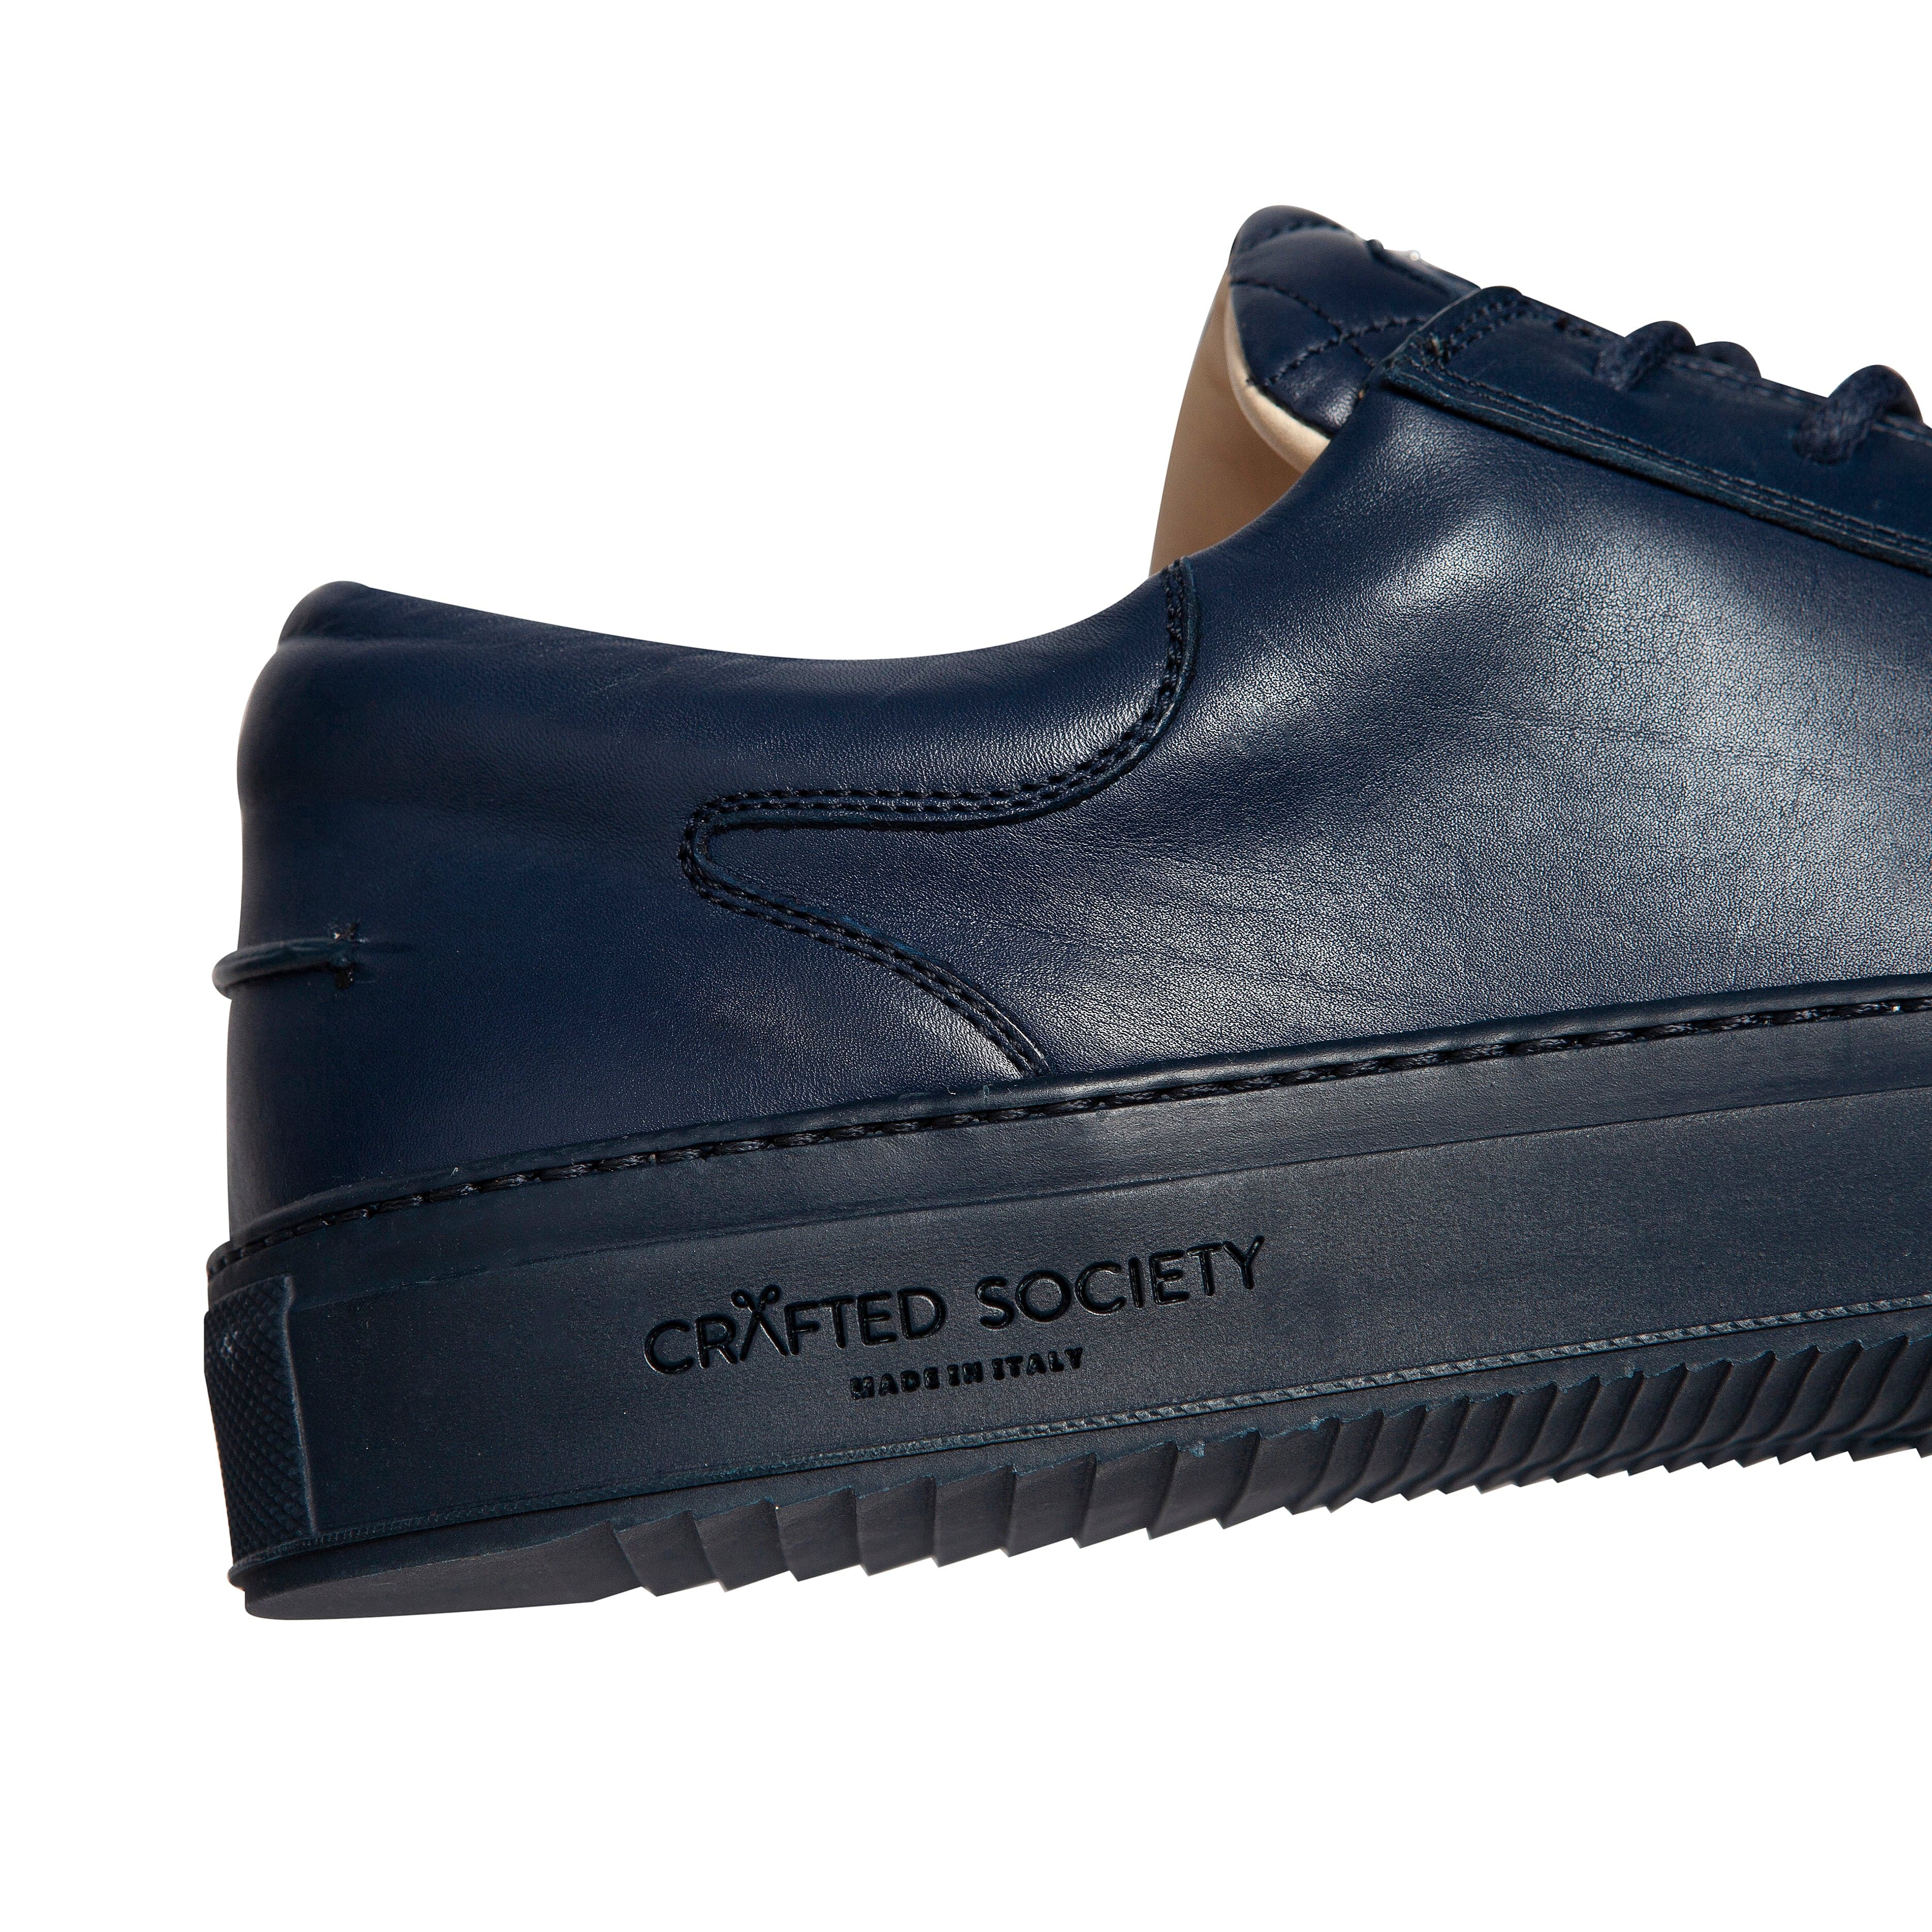 Mario Low Refined Sneaker | Petrol Blue Nappa Leather | Navy Outsole | Made in Italy